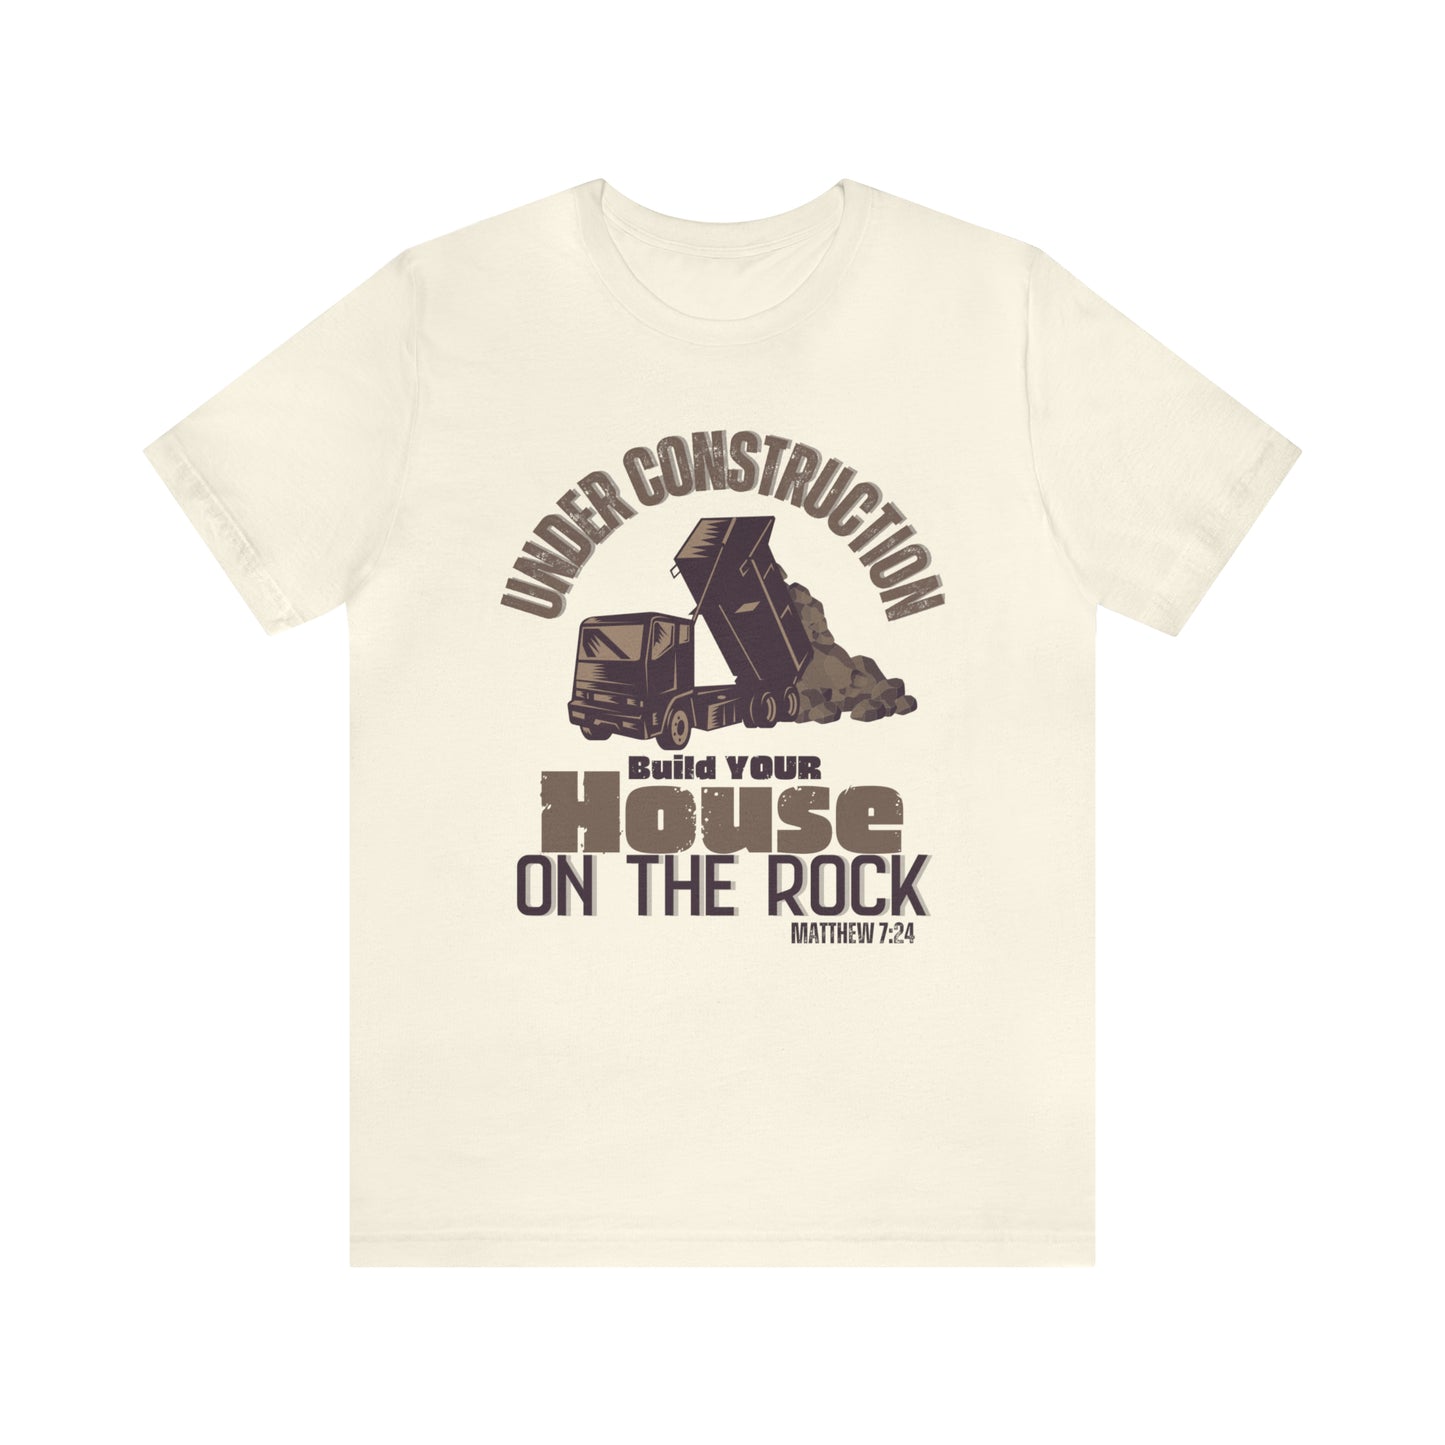 Under Construction, Build Your House on the Rock (Green Pastures Apparel)